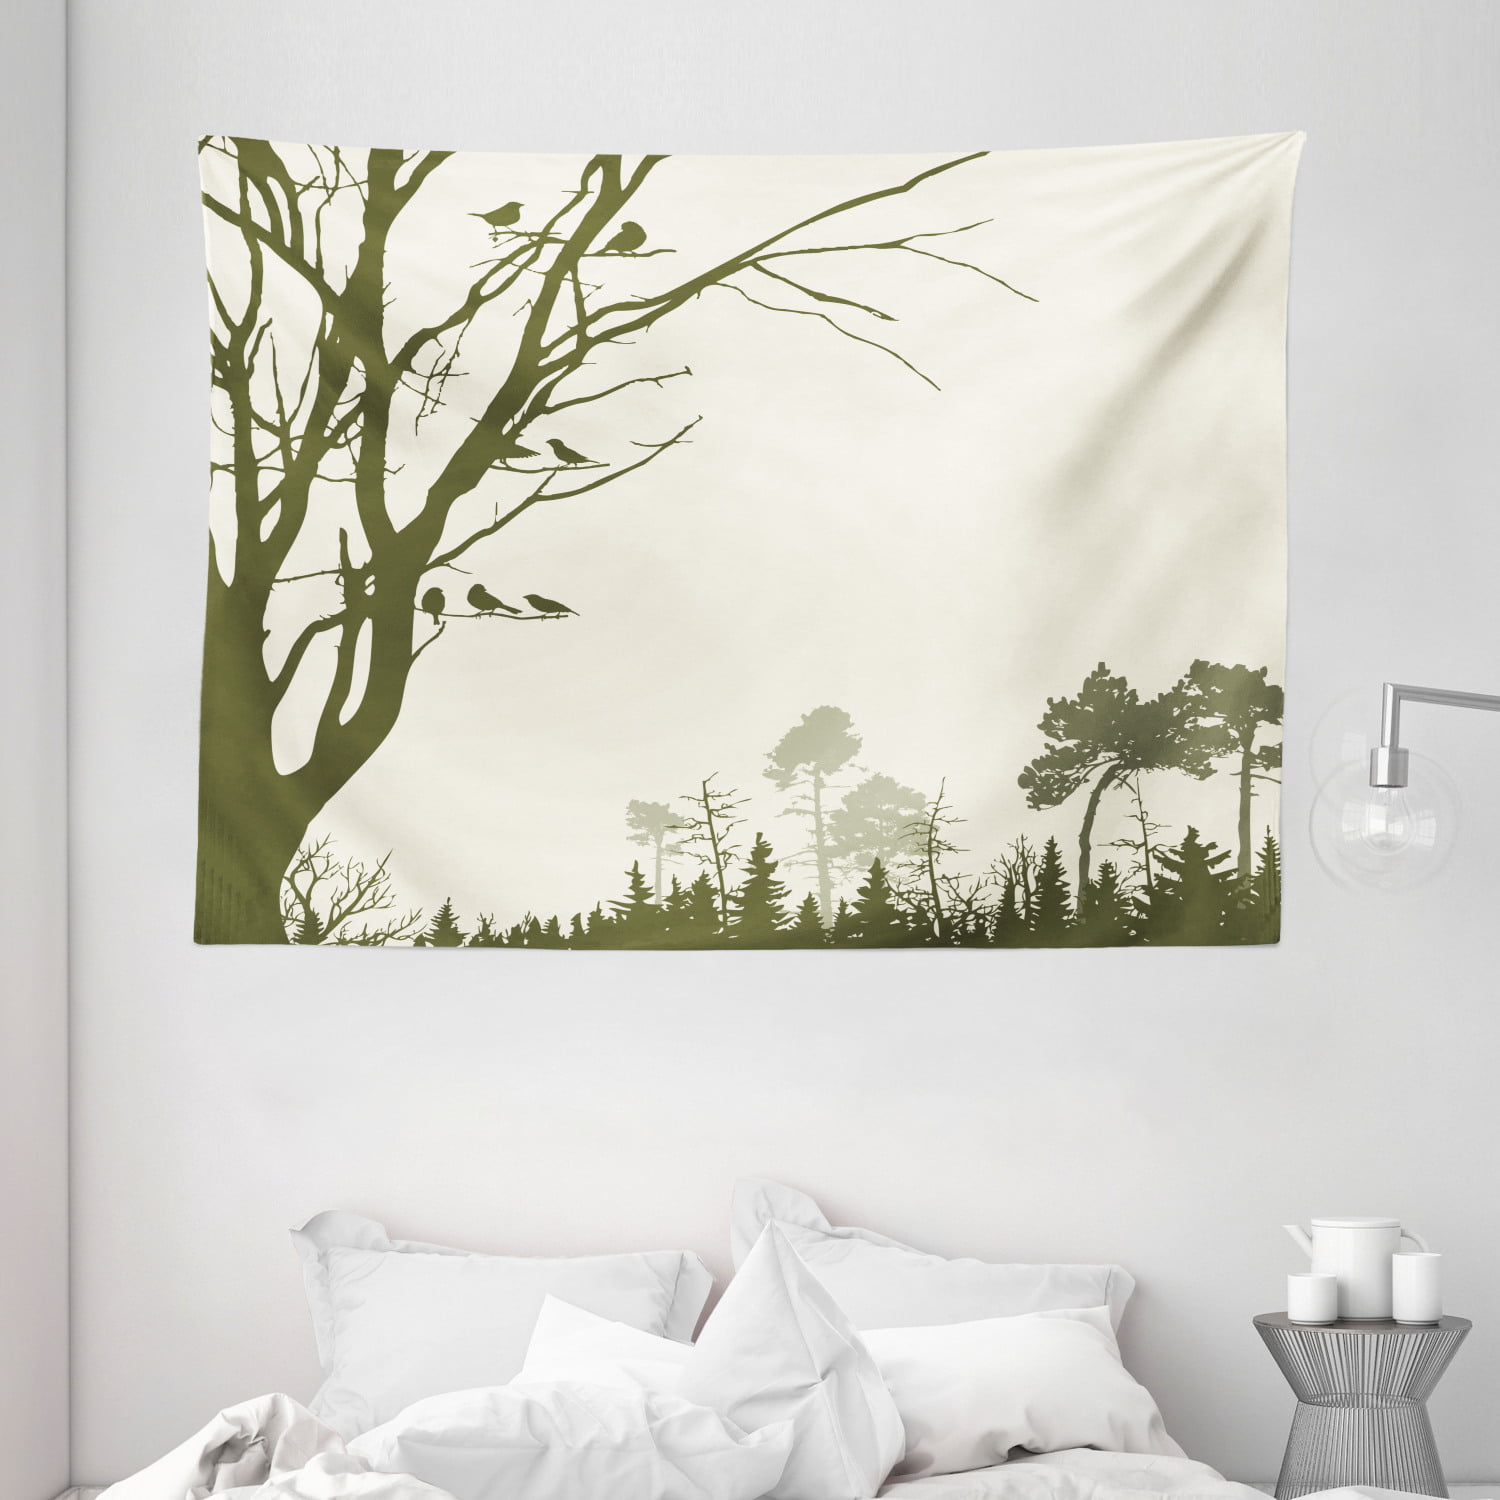 Forest Tree Theme Tapestry Wall Hanging Living Room Bedroom Dorm Decor 